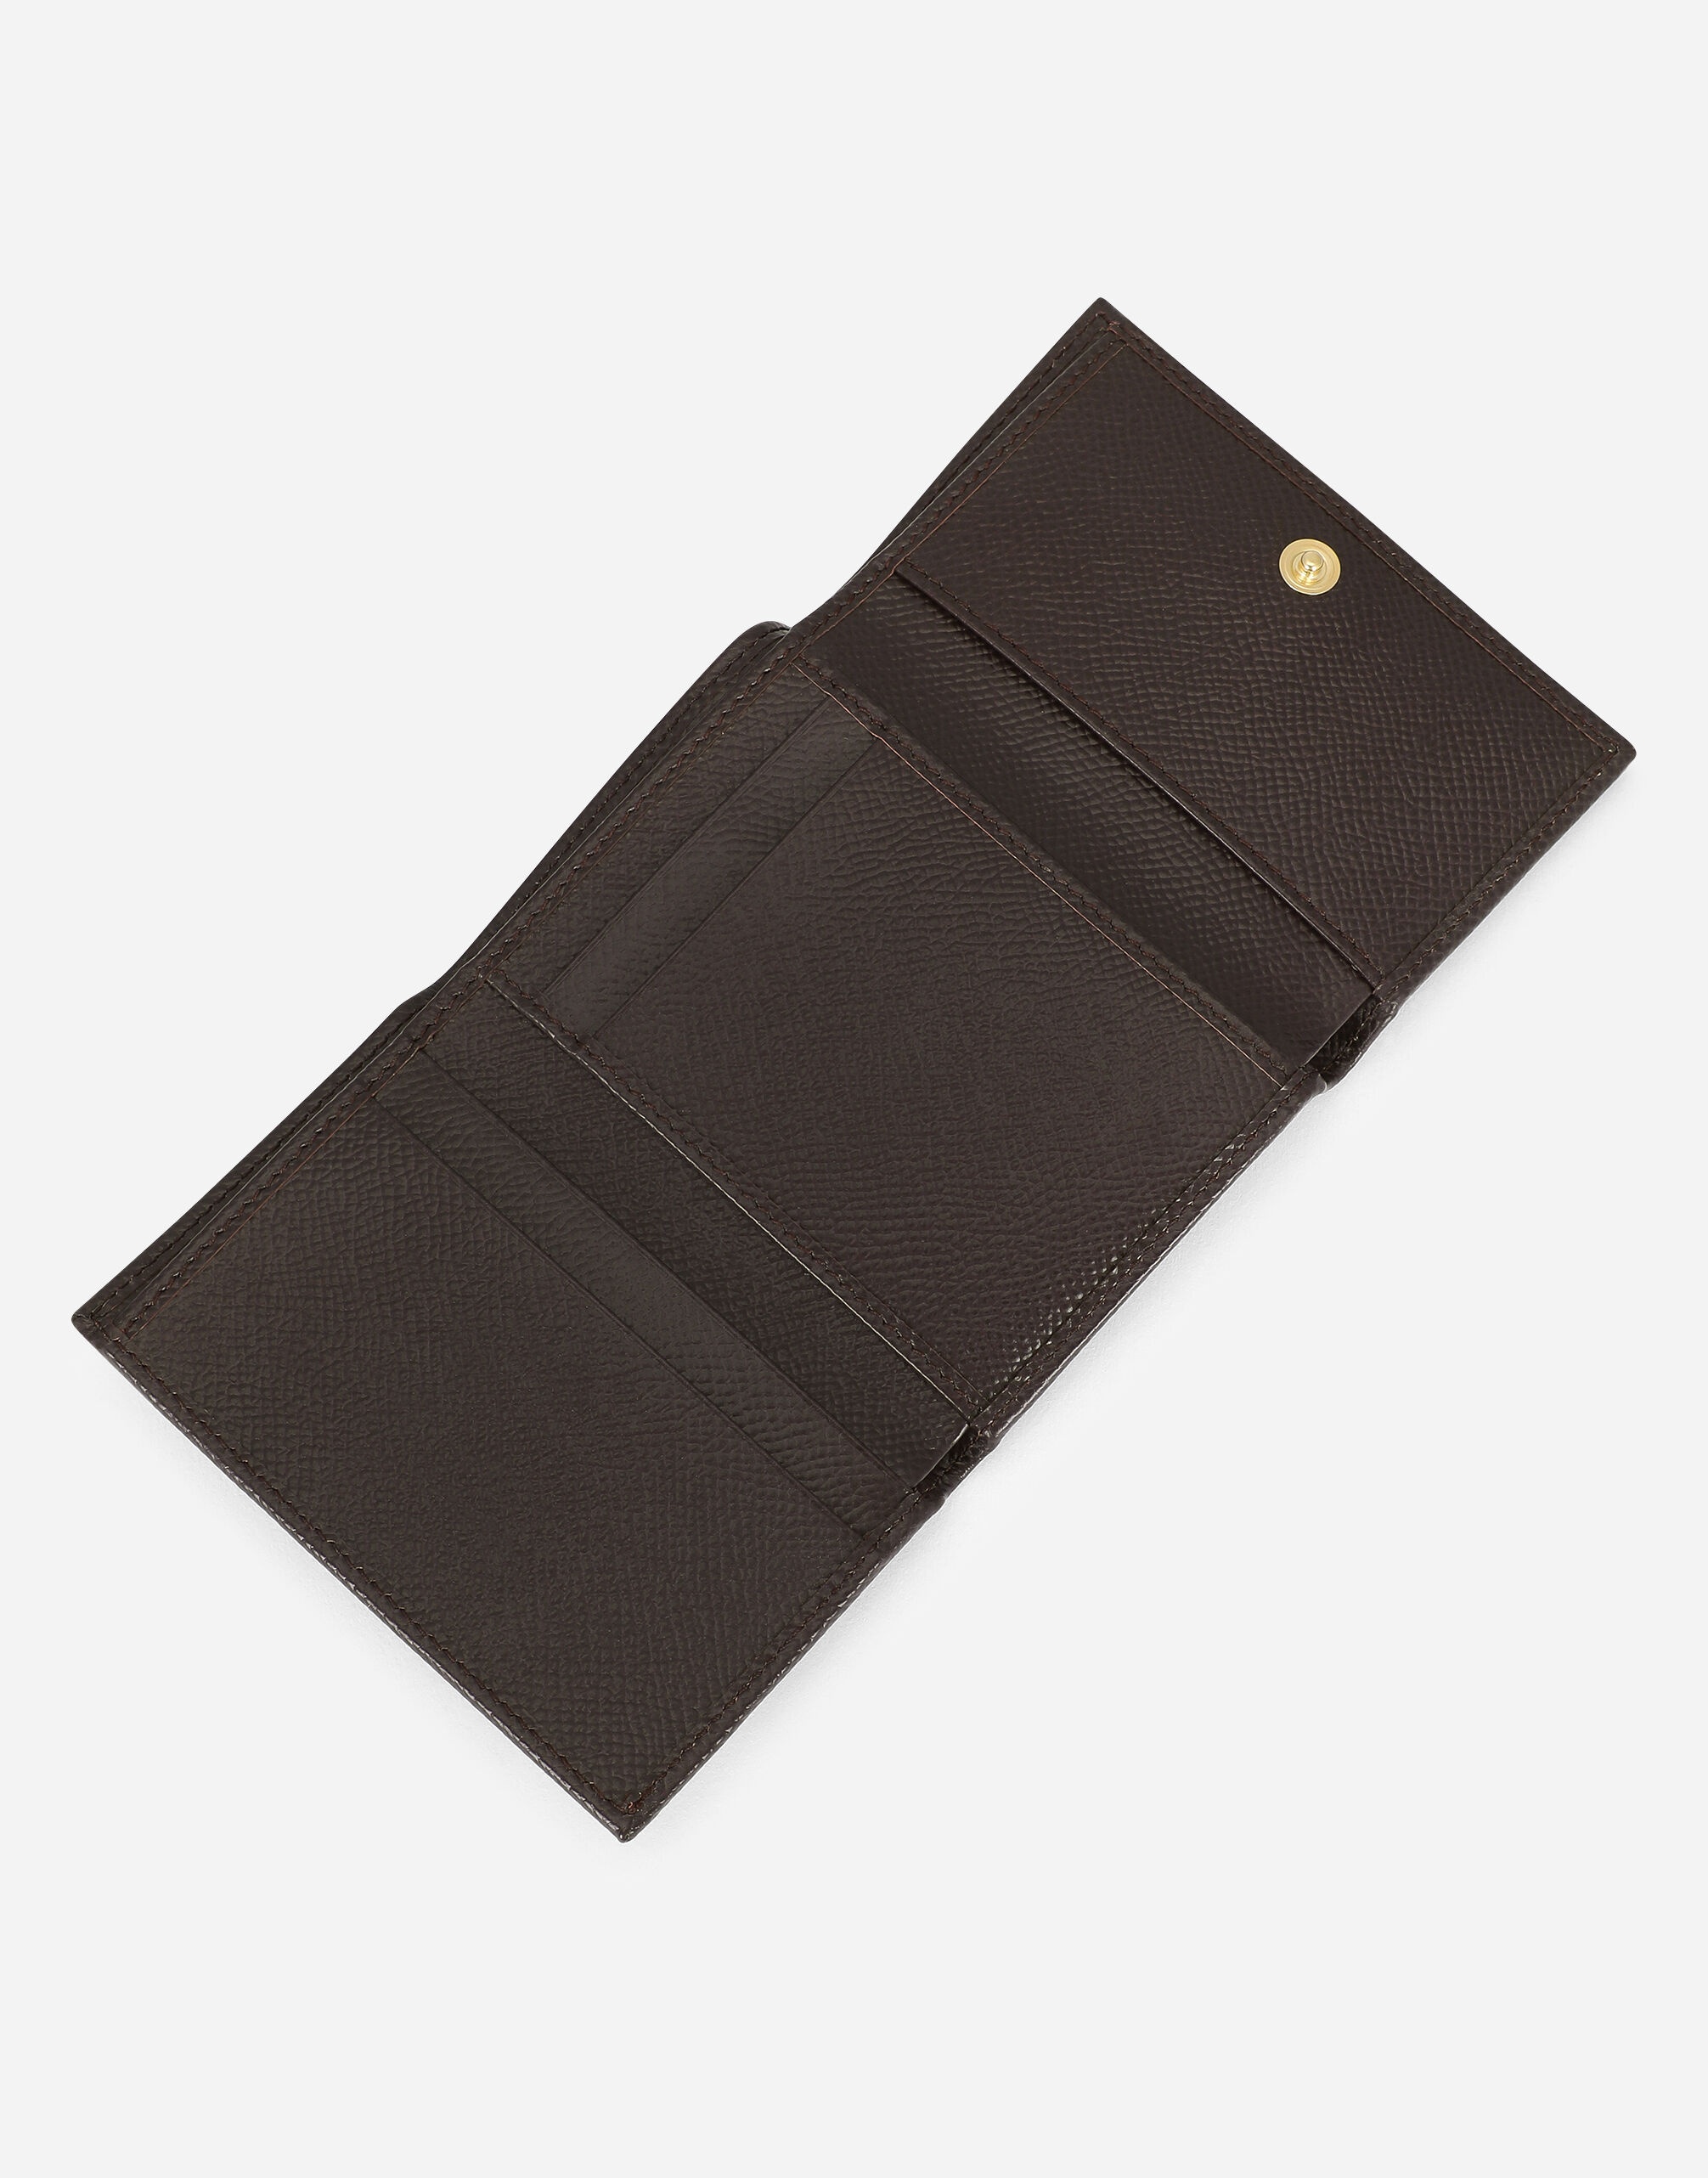 Dauphine calfskin wallet with branded tag - 4